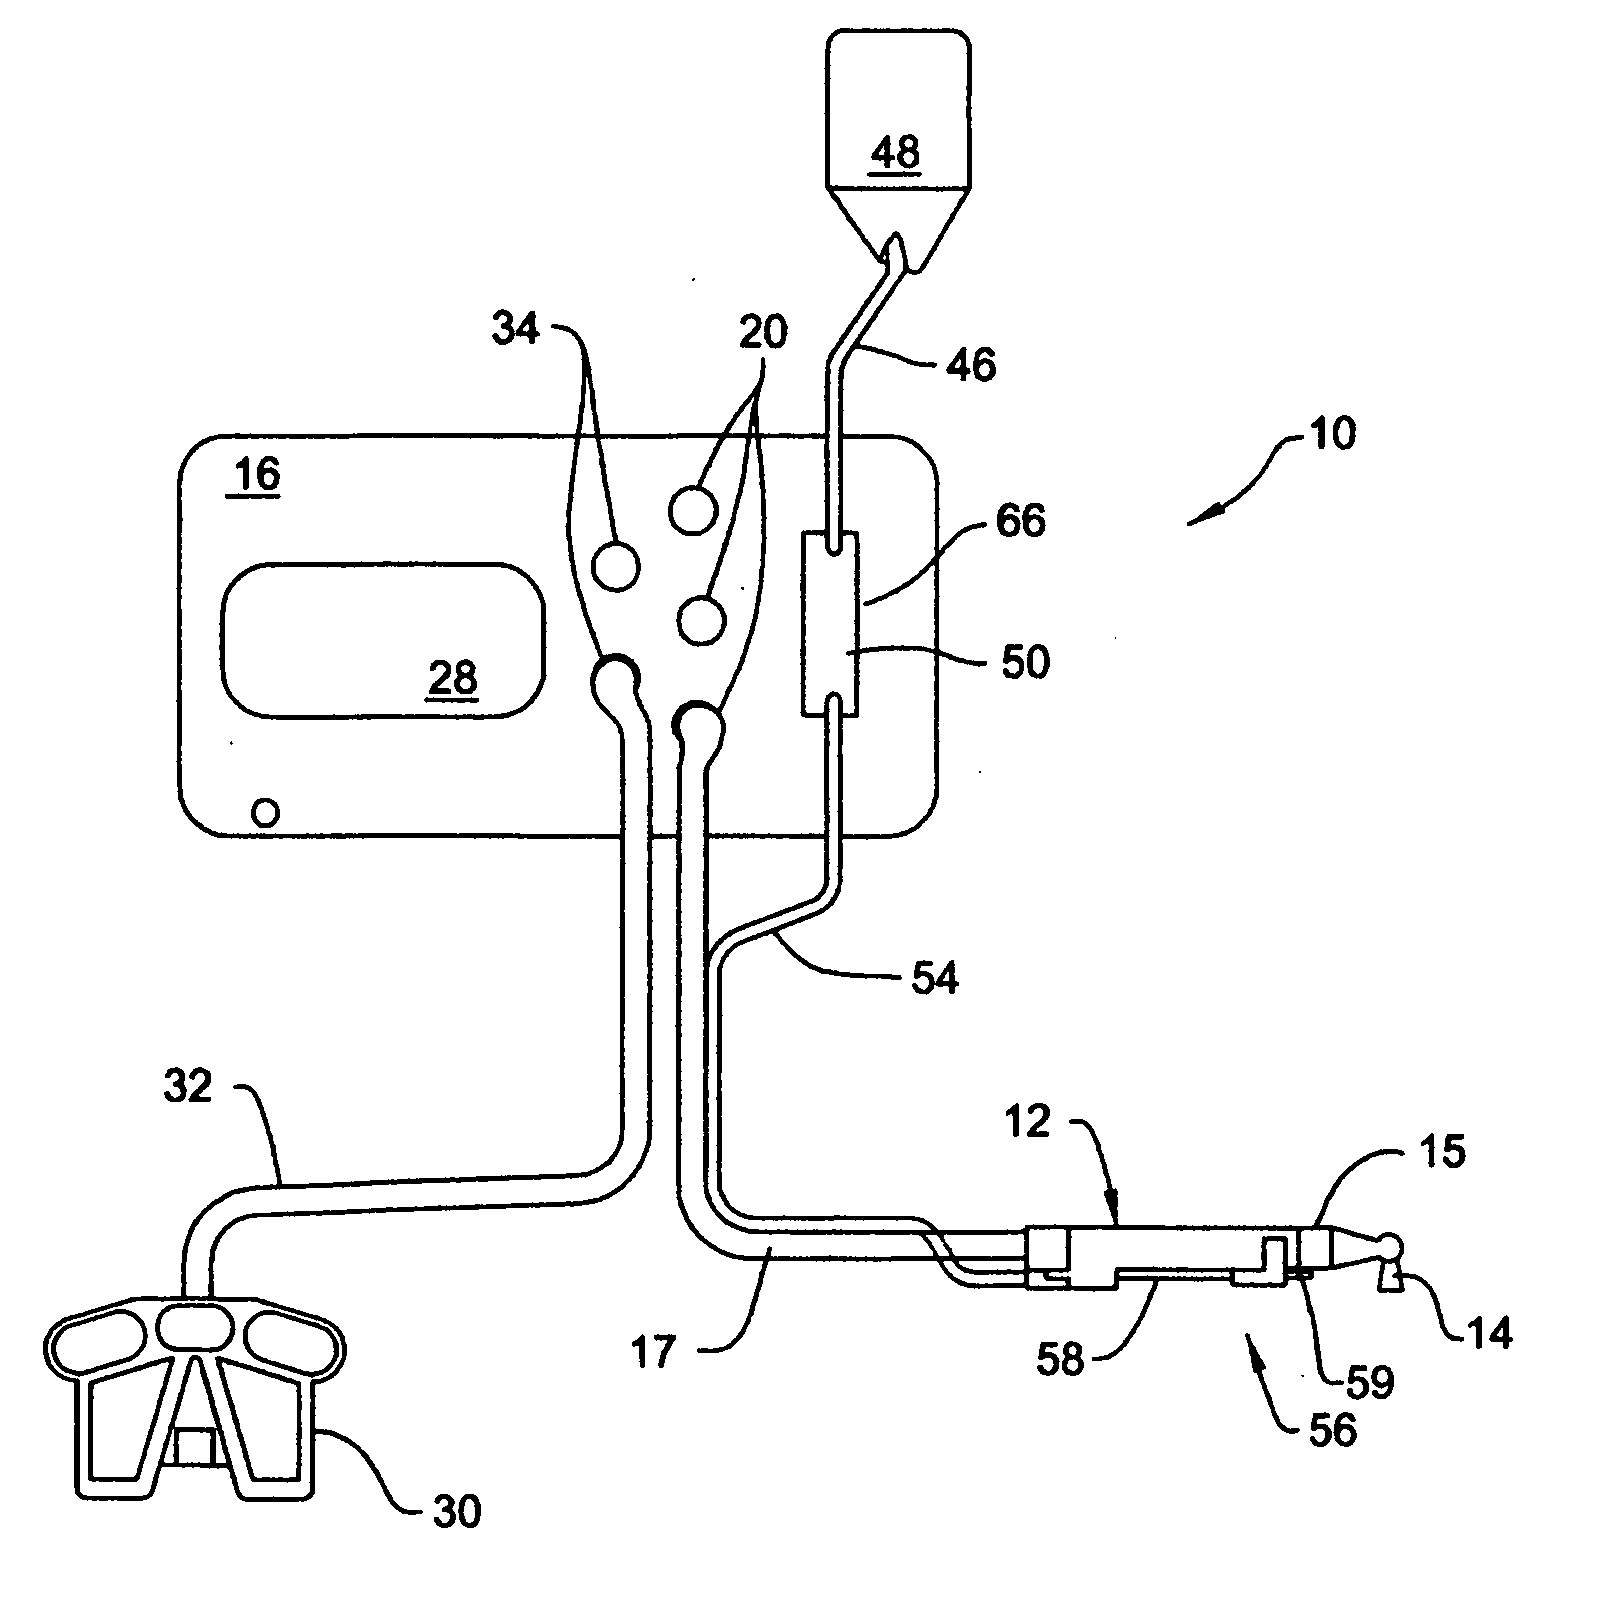 Surgical tool system with integrated pump